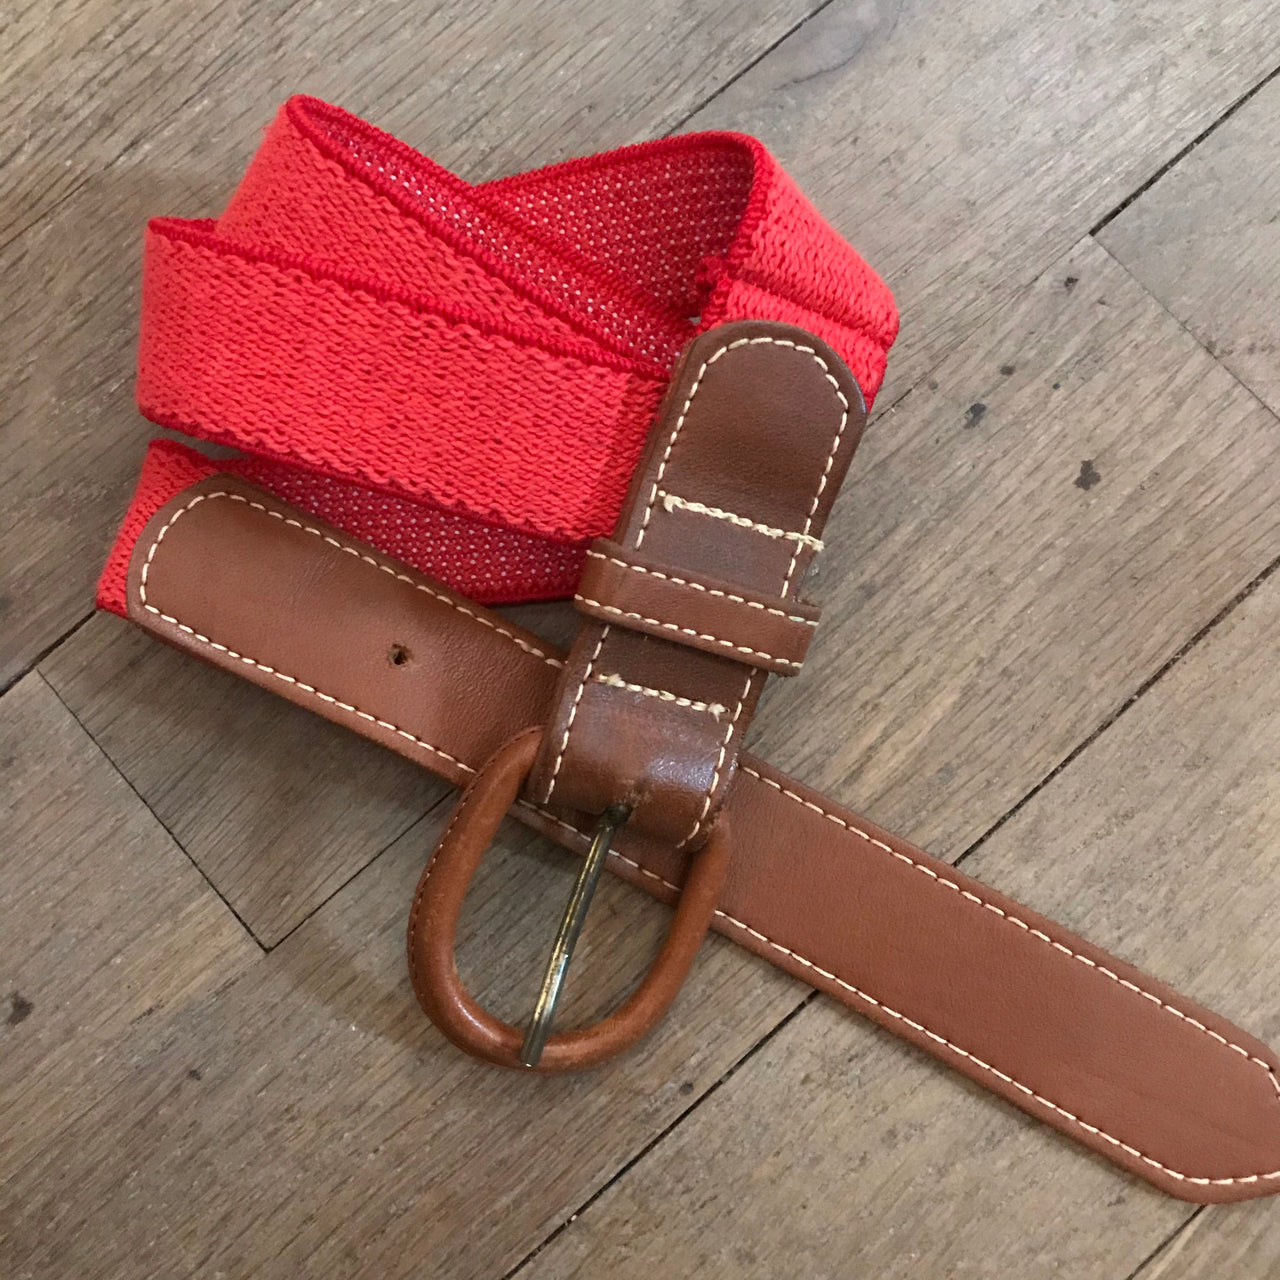 1970s Red Elastic Stretch Belt with Leather Buckle Accessory Bloomers and Frocks 